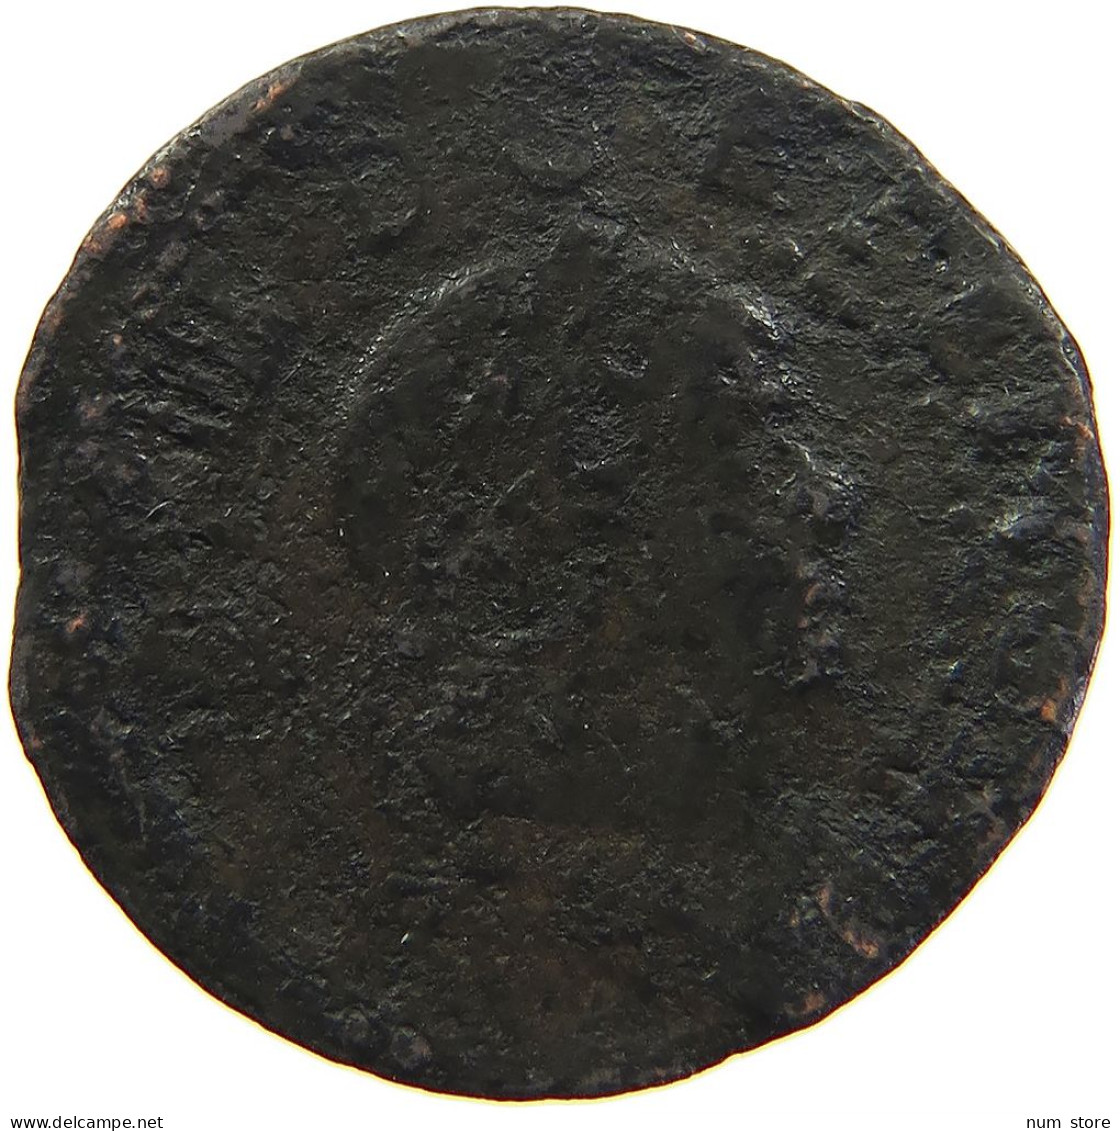 SPAIN BARCELONA SEISENO 1651 LOUIS XIV. #s100 0395 - First Minting